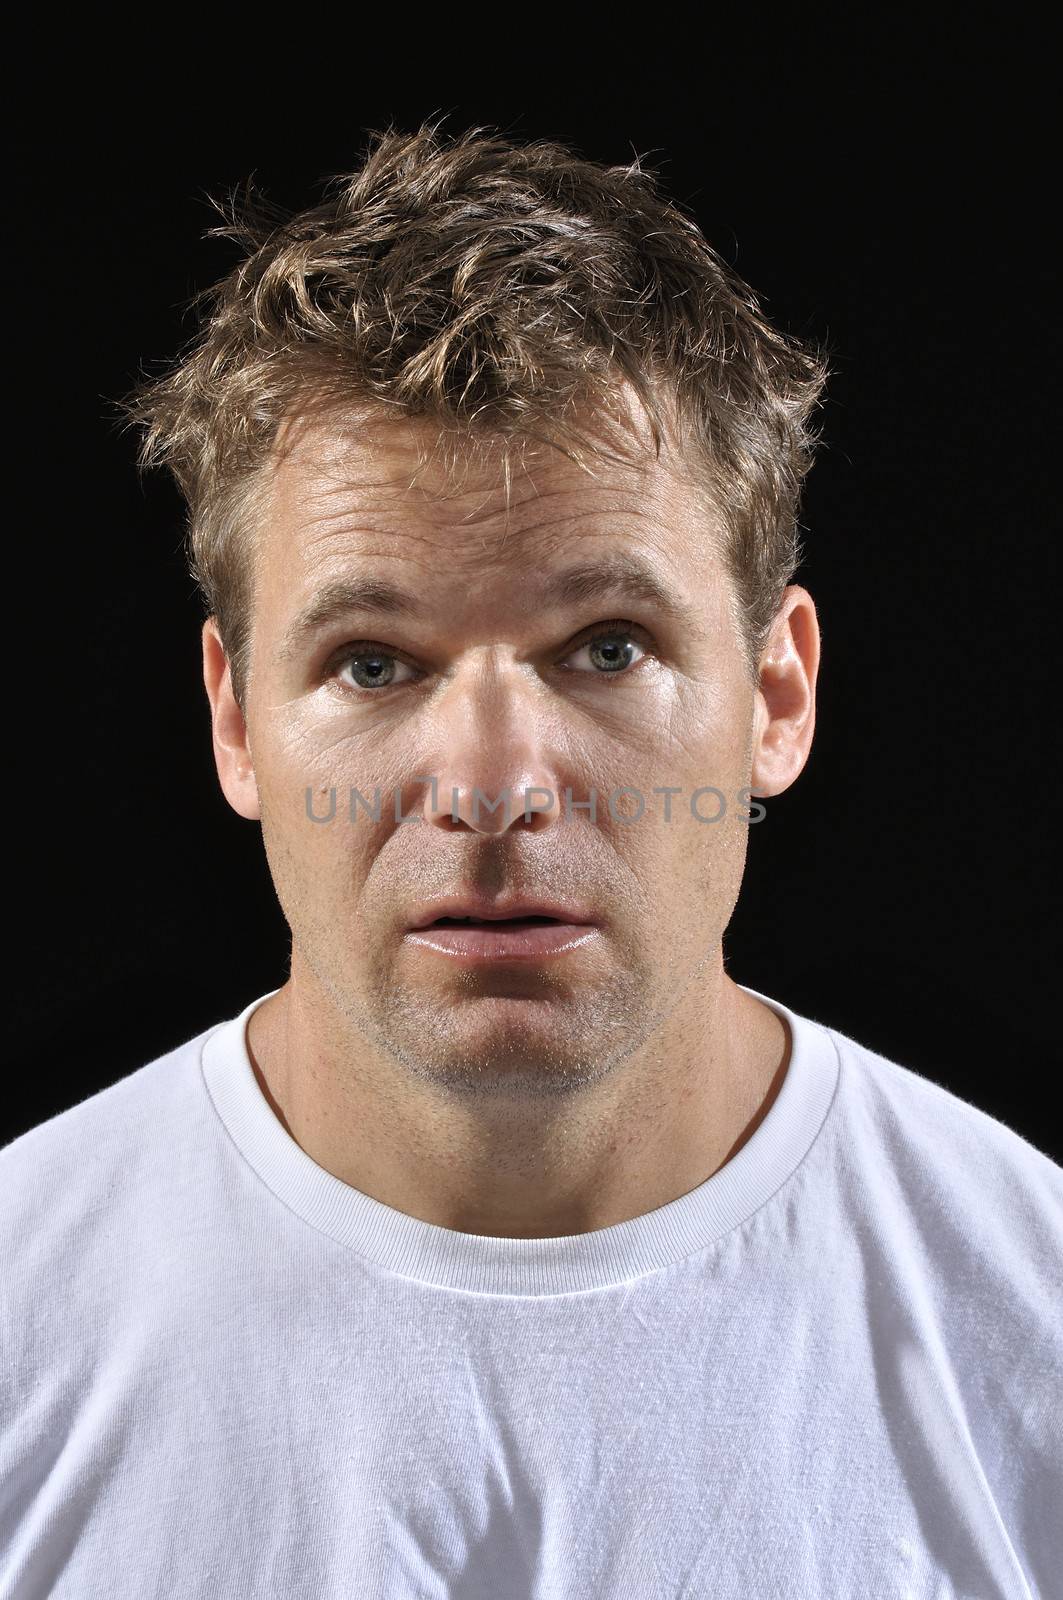 Mug shot of Caucasian man with messy blond hair in white t-shirt on black background